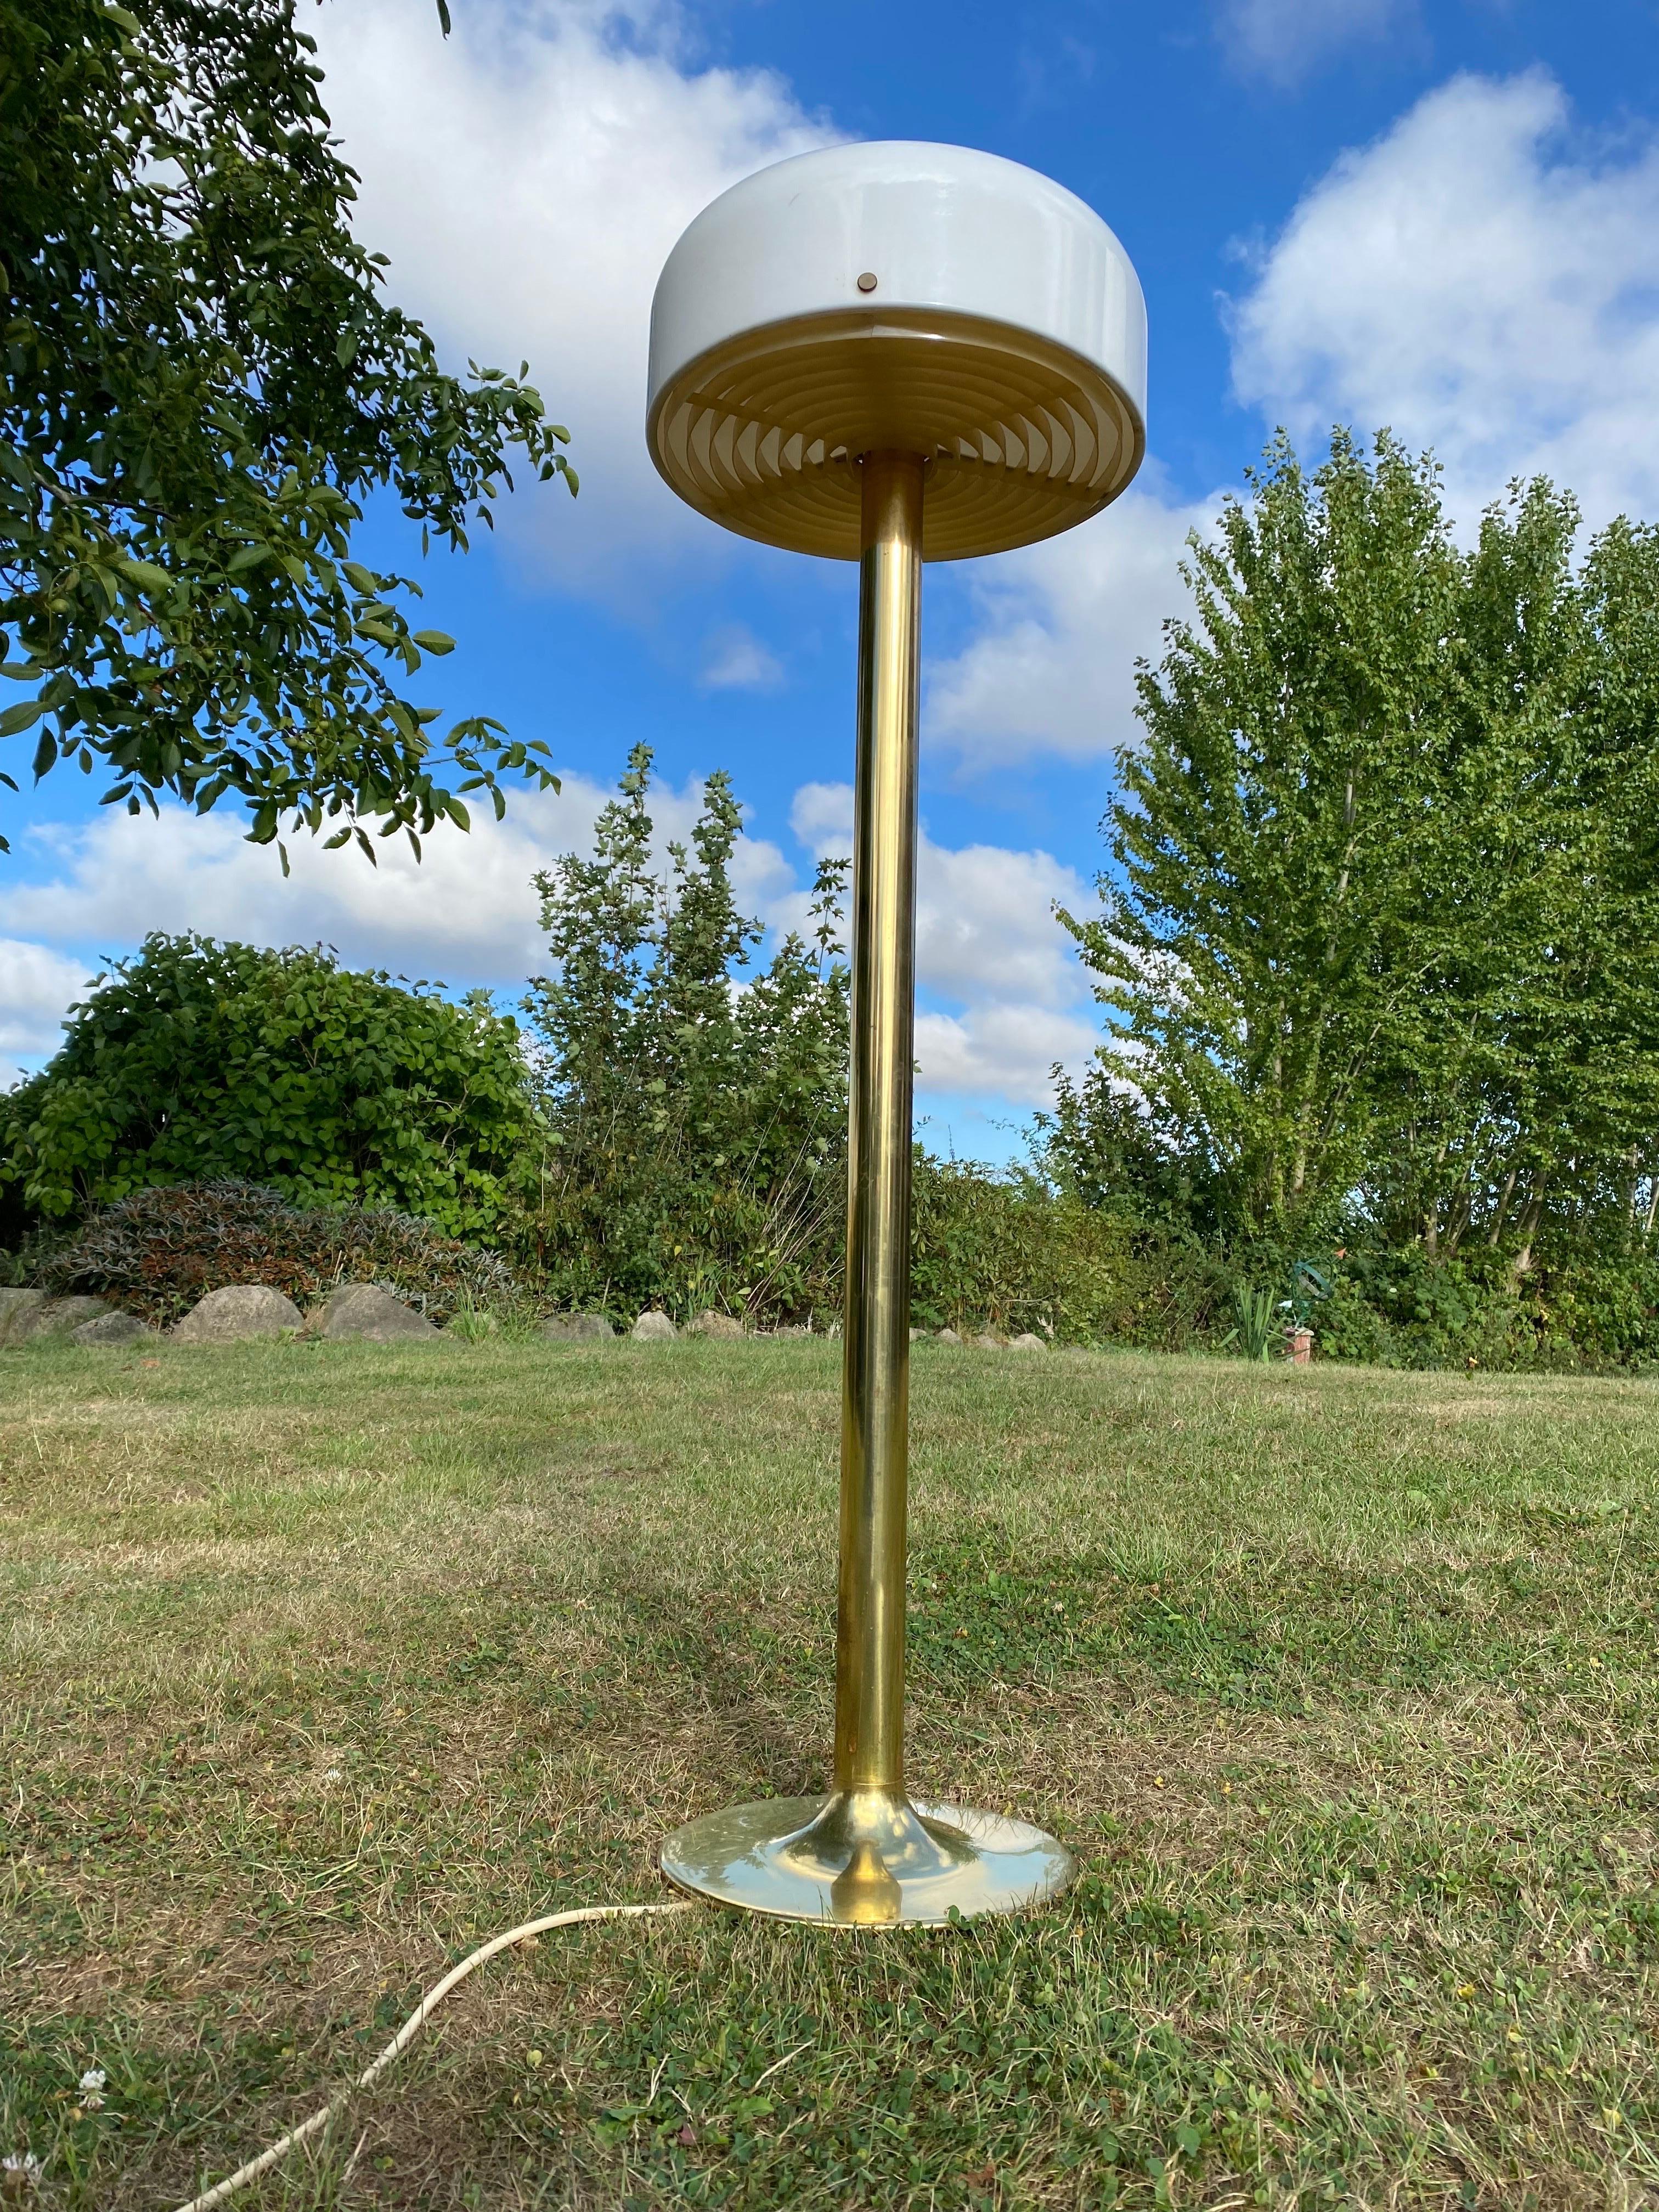 Rare floor lamp model Knubbling designed by Anders Pehrson. Produced by Ateljé Lyktan in Åhus, Sweden in the late 1970s. This is the small Knubbling model, only 40 cm in diameter, 125 i hight. 

This Knubbling floor lamp is a fantastic example of